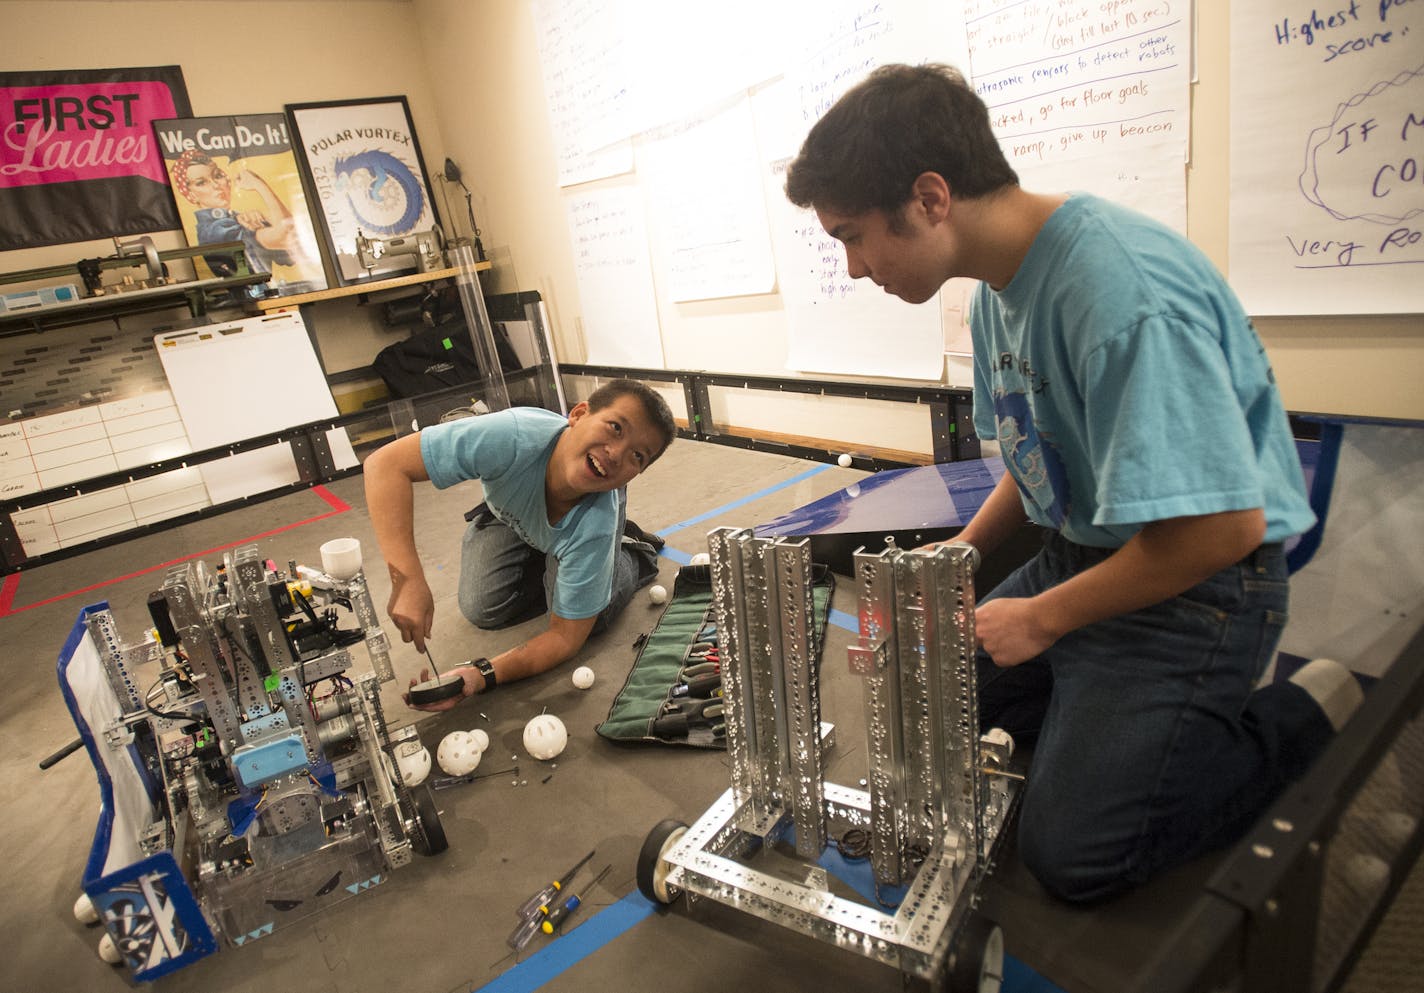 Eighth grader Cody Huynh, left, laughed as he replaced the chain on "FrostByte," the robot of team "Polar Vortex," as Andrew Nguyen worked on disassembling another robot during a team practice Tuesday night. ] Aaron Lavinsky &#x2022; aaron.lavinsky@startribune.com Despite being comprised of mostly freshman girls and not tied to any school, a rookie robotics team from a Lakeville neighborhood has received international recognition along with an invitation to compete in Australia next year. The te